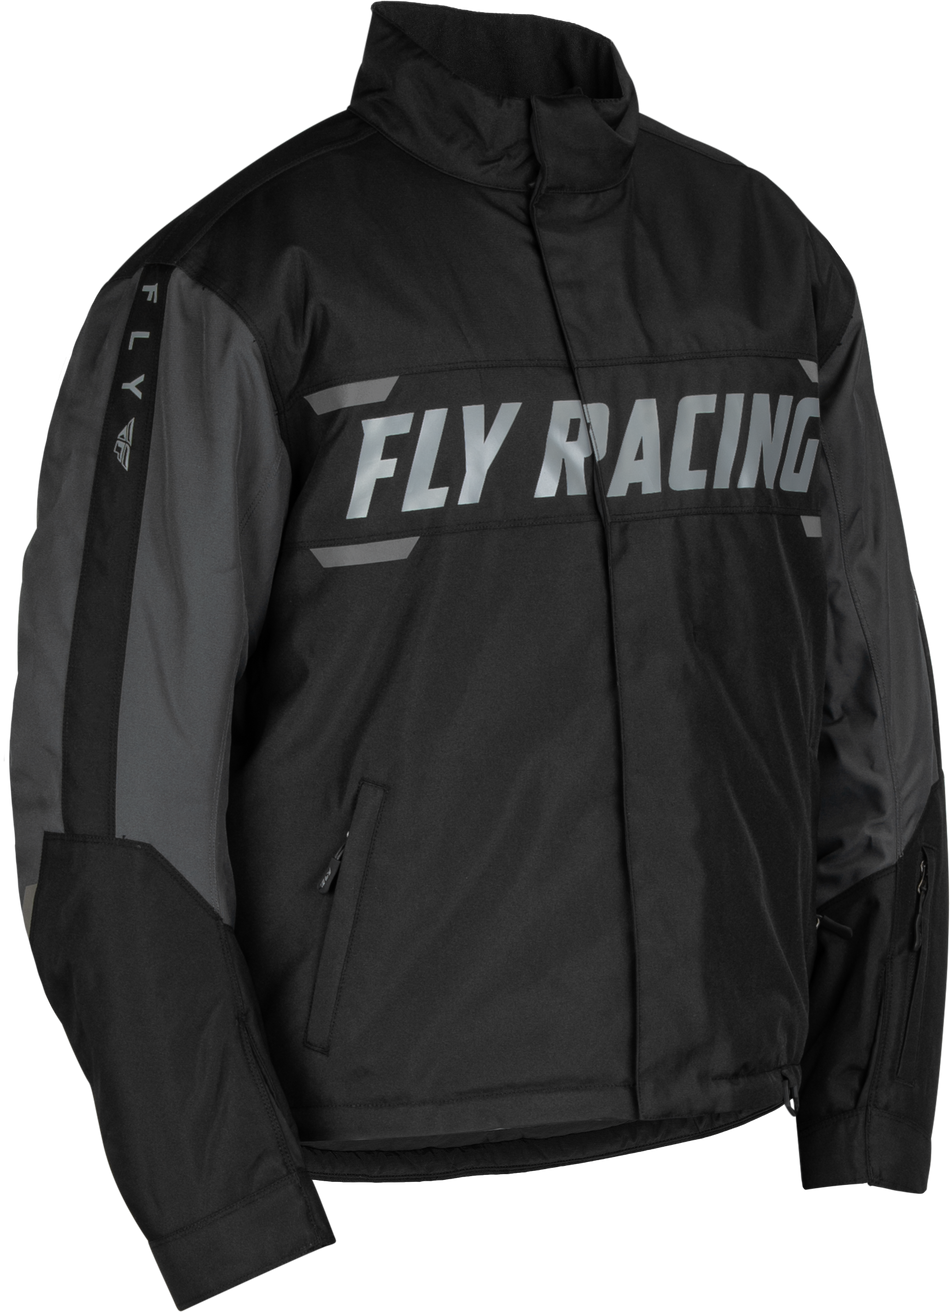 FLY RACING Outpost Jacket Black/Grey 3x 470-55003X